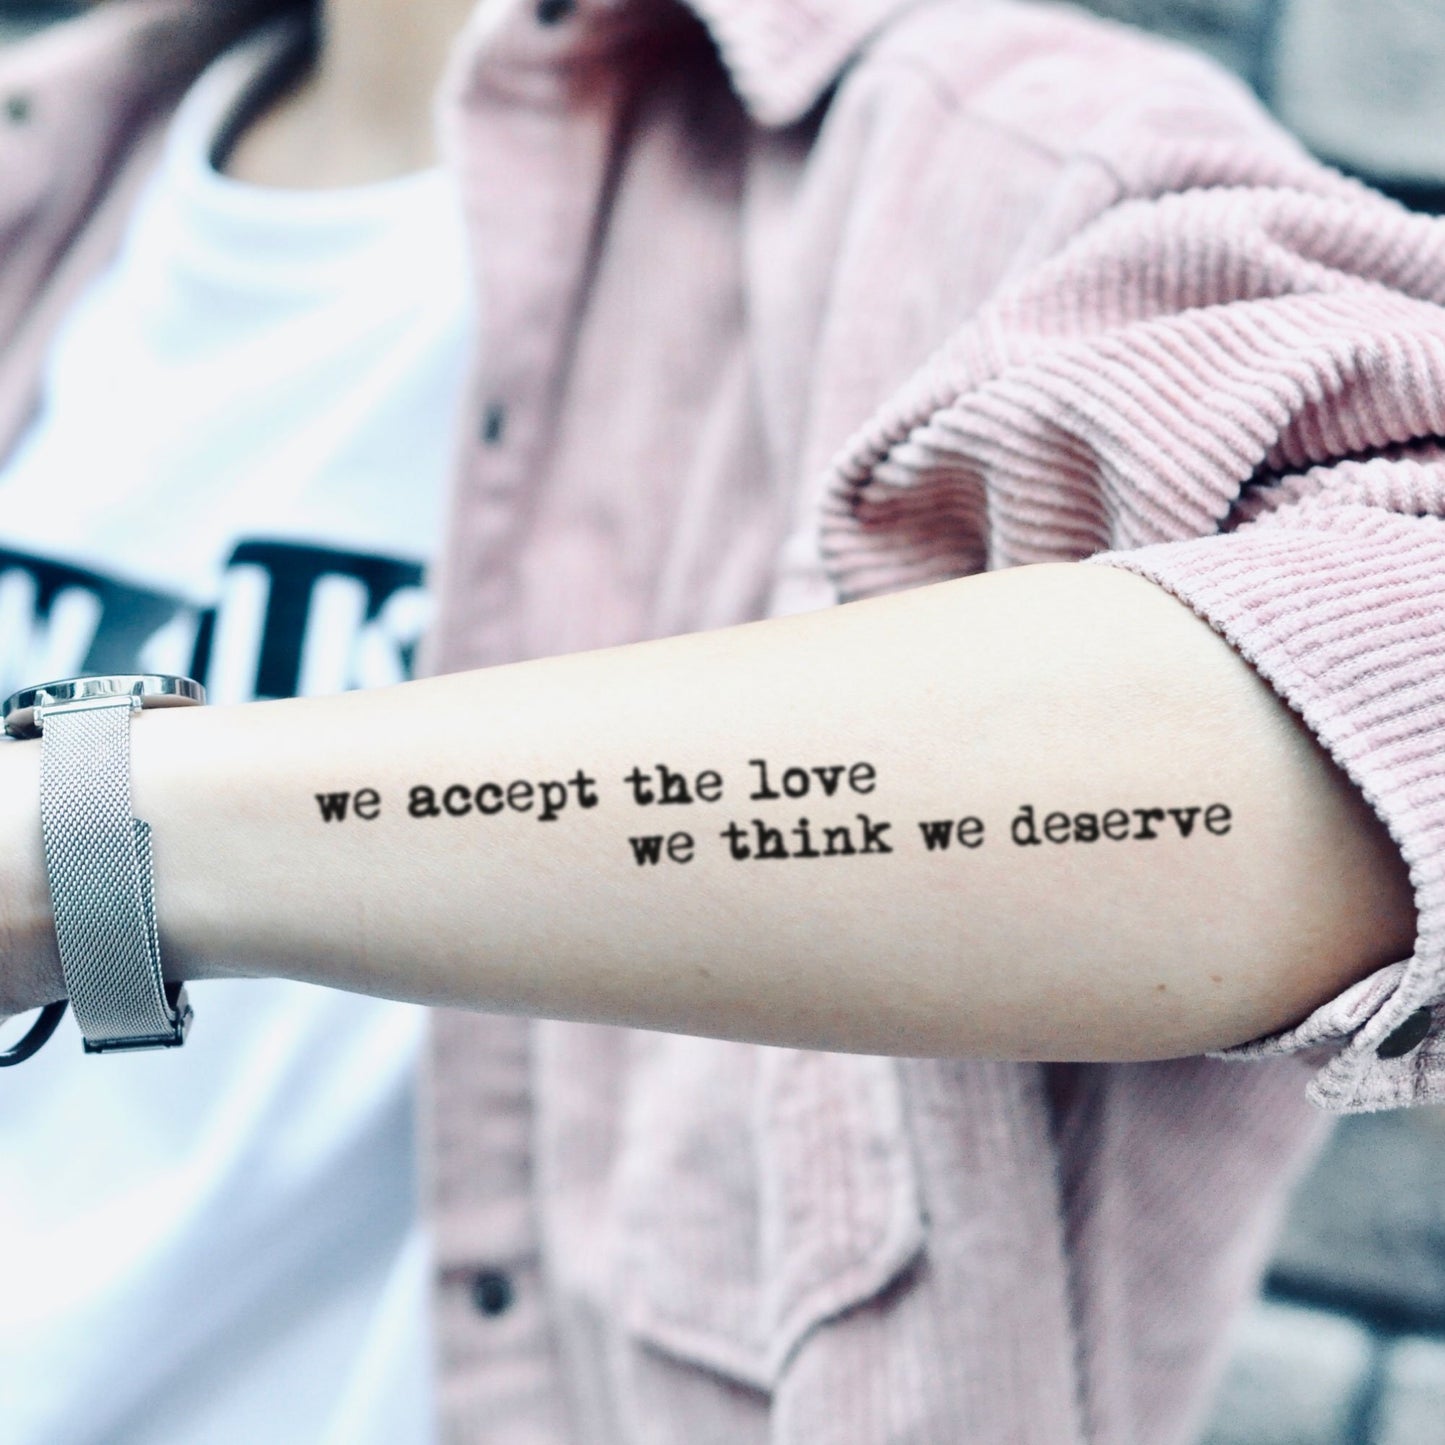 fake medium we accept the love we think we deserve wallflower quote script lettering temporary tattoo sticker design idea on forearm